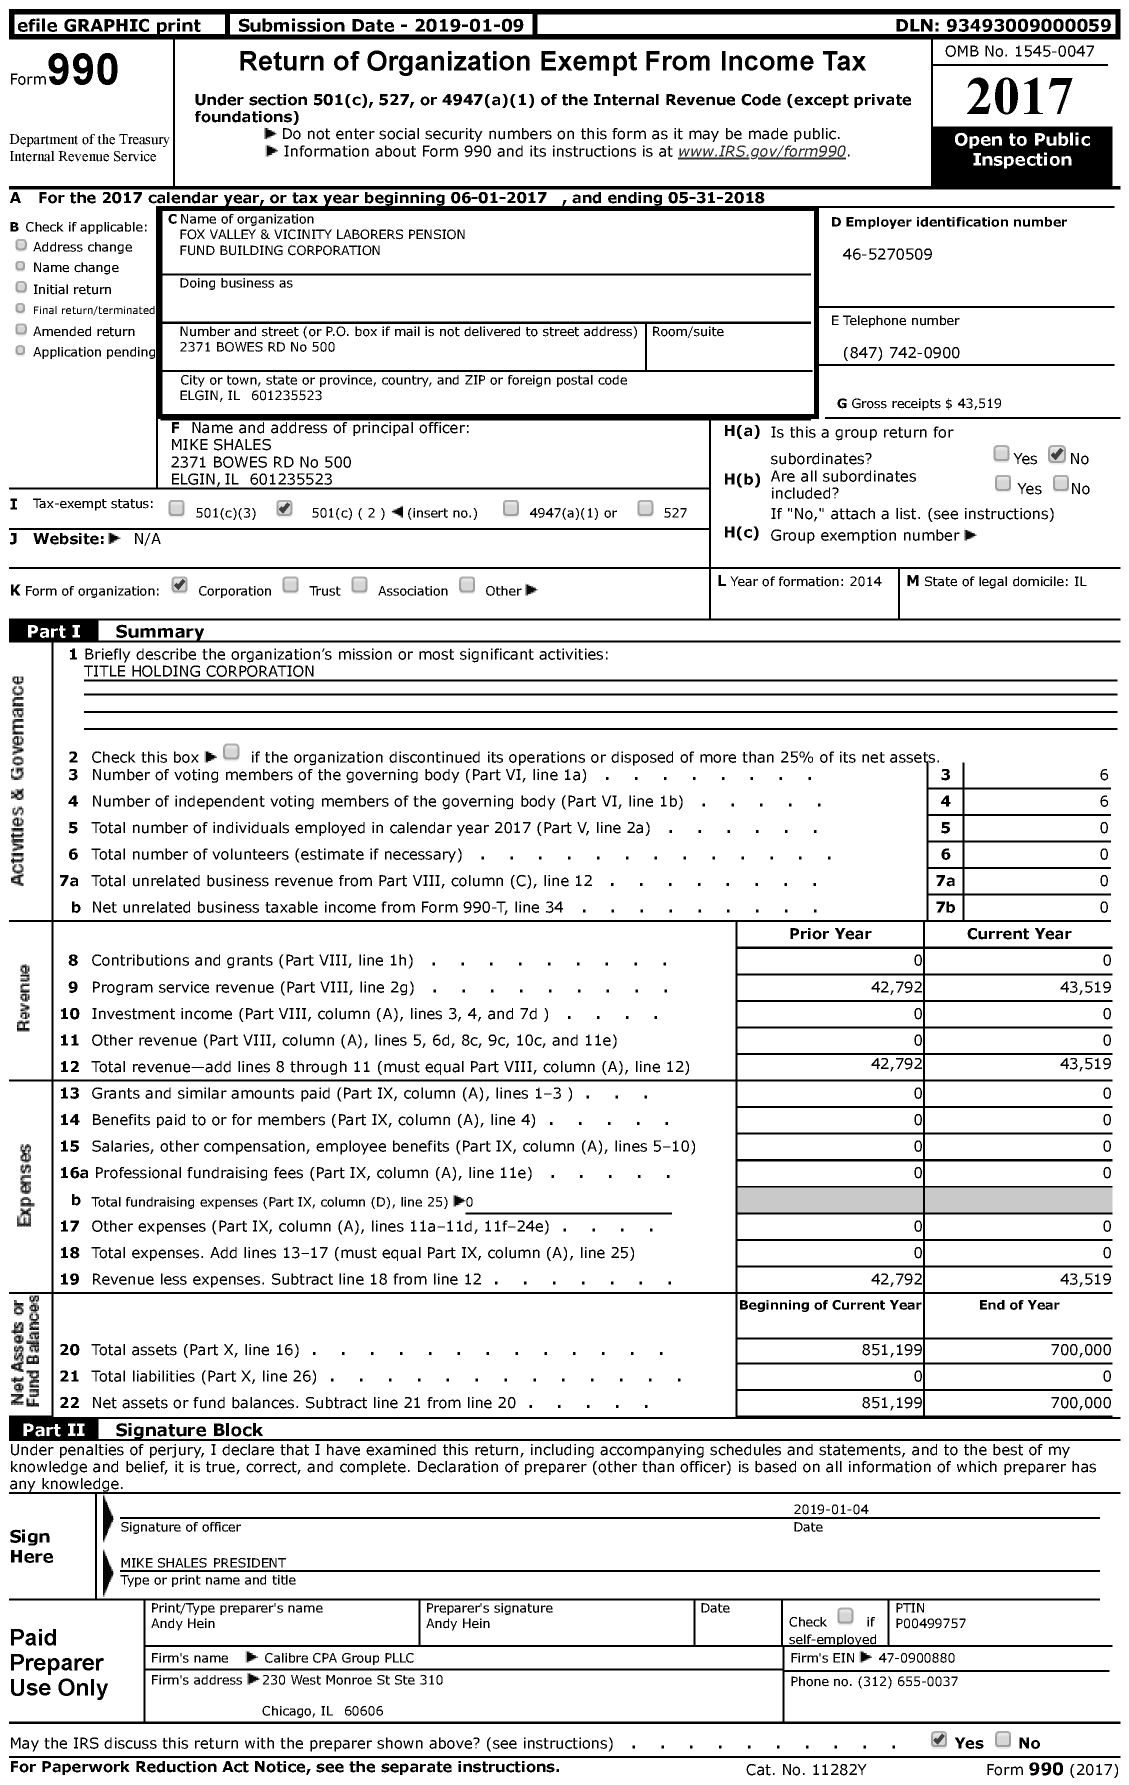 Image of first page of 2017 Form 990 for Fox Valley and Vicinity Laborers Pension Fund Building Corporation